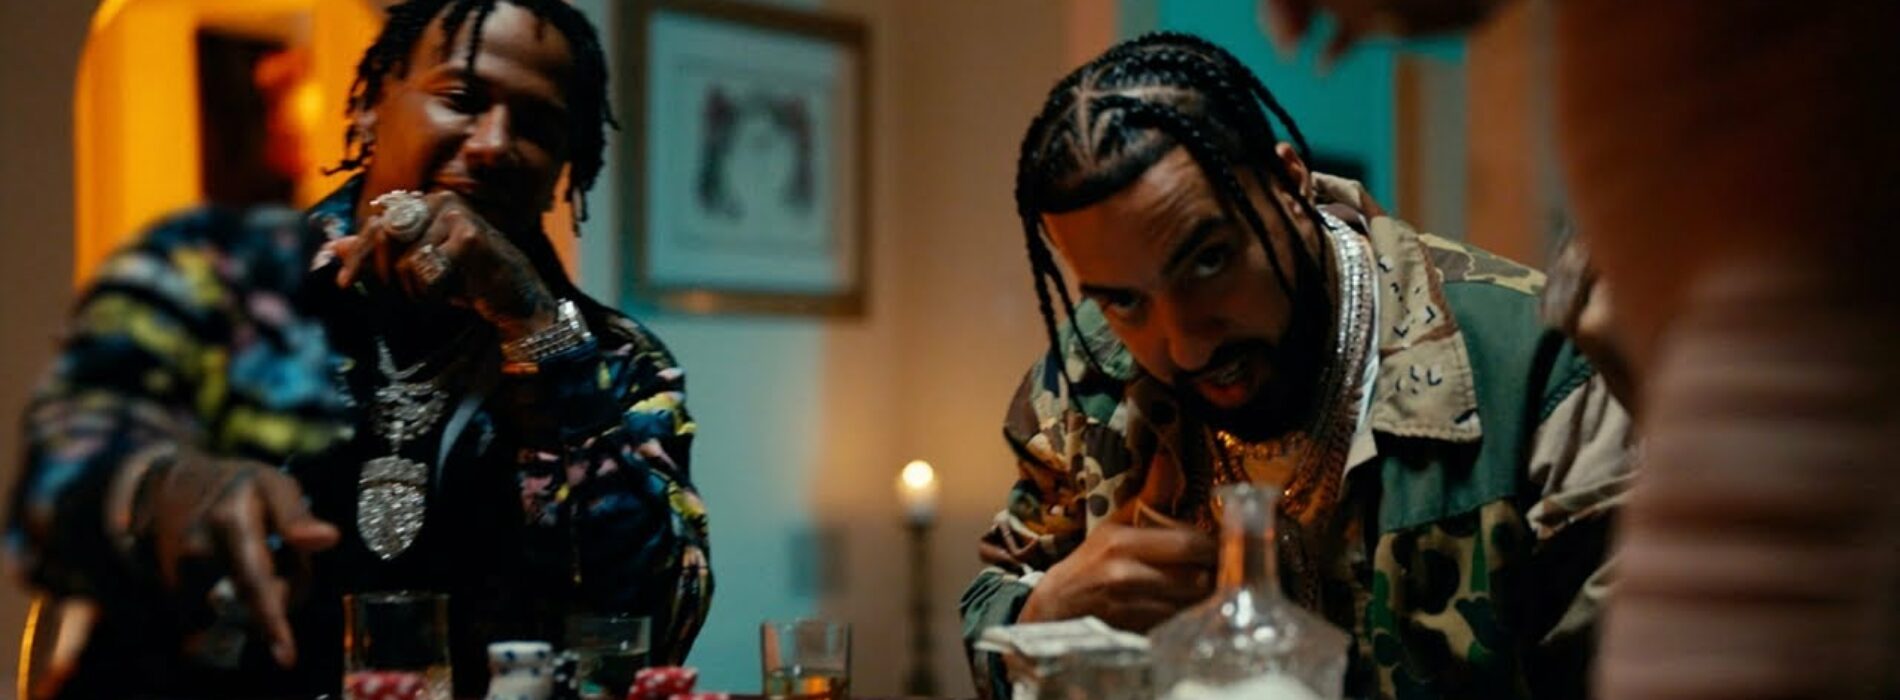 French Montana ft. Moneybagg Yo – FWMGAB (Remix) (Official Music Video) – Janvier 2022💥🎵🎶🚀🚀